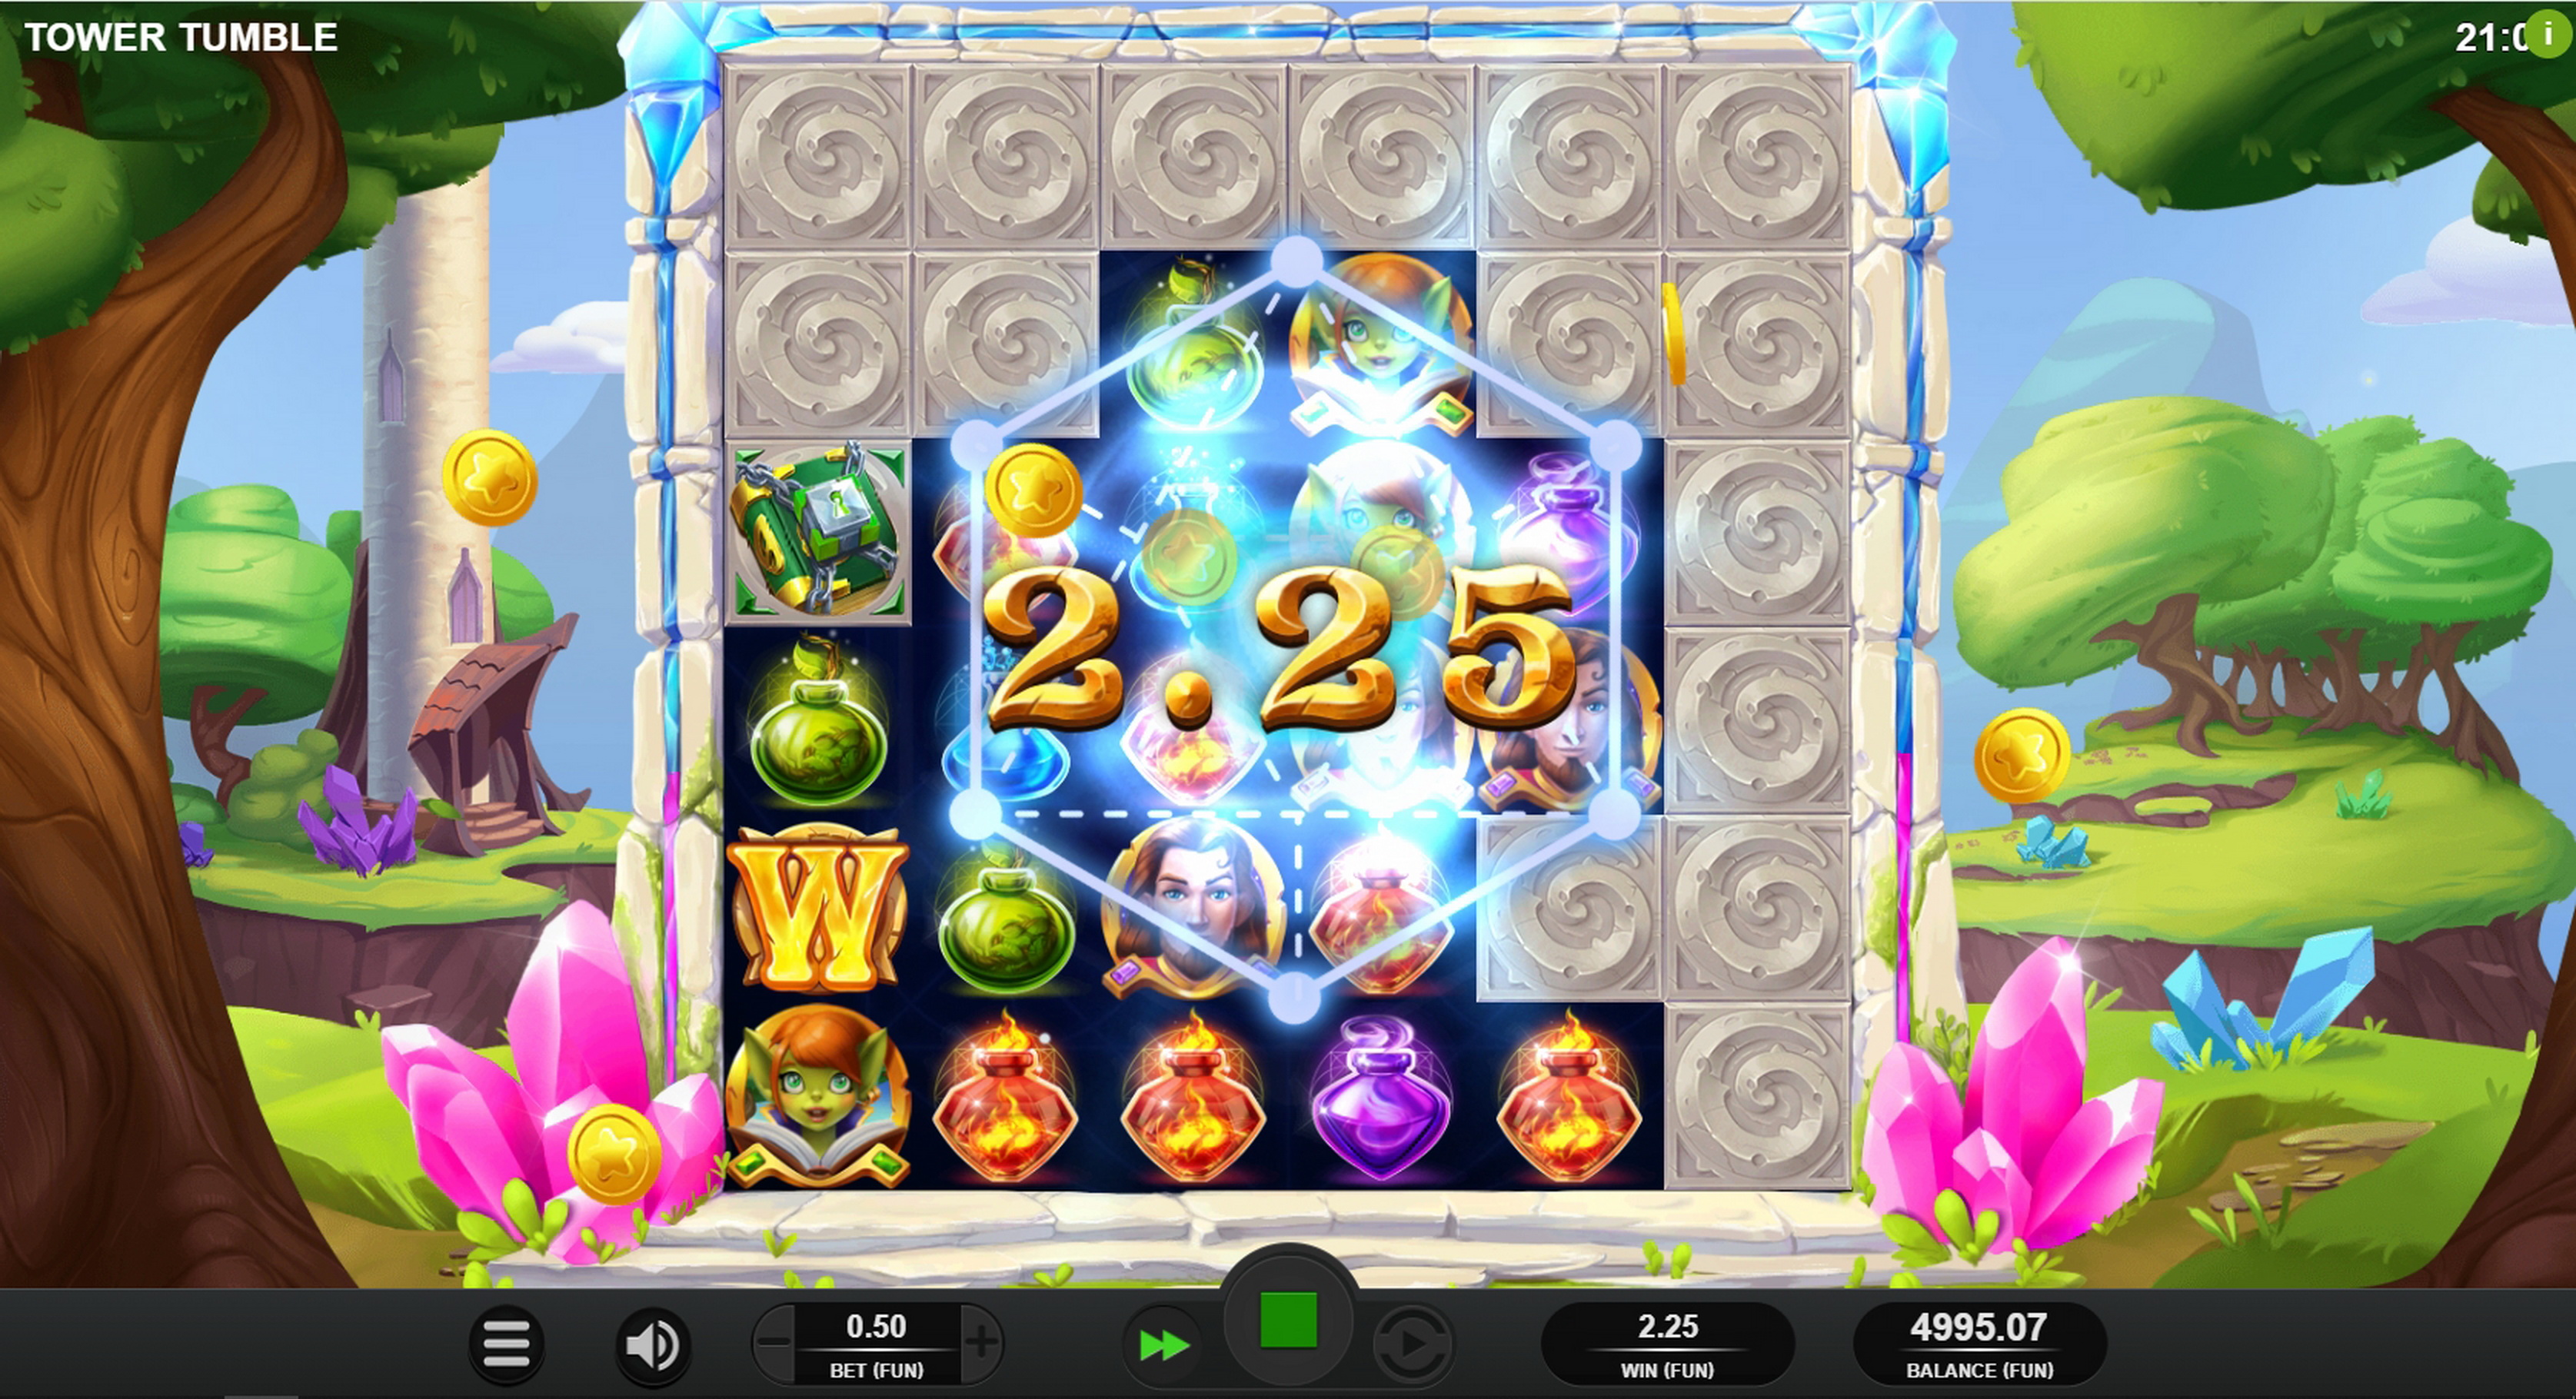 Win Money in Tower Tumble Free Slot Game by Relax Gaming